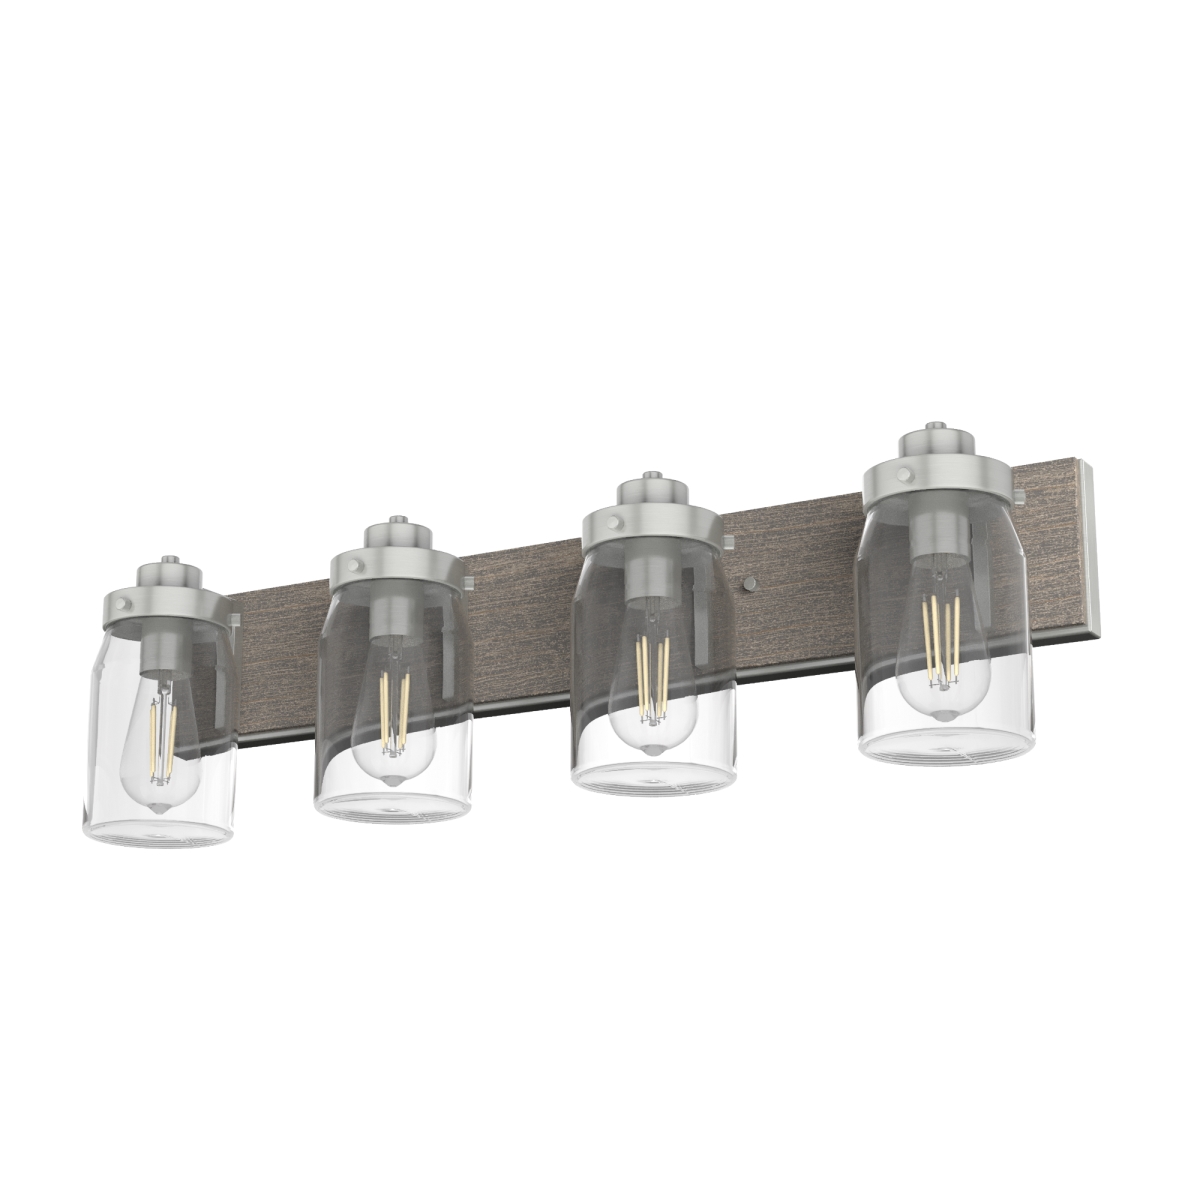 Picture of Hunter 48022 8.5 in. Devon Park Brushed Nickel & Gray Wood with Clear Glass 4 Light Bathroom Vanity Wall Light Fixture